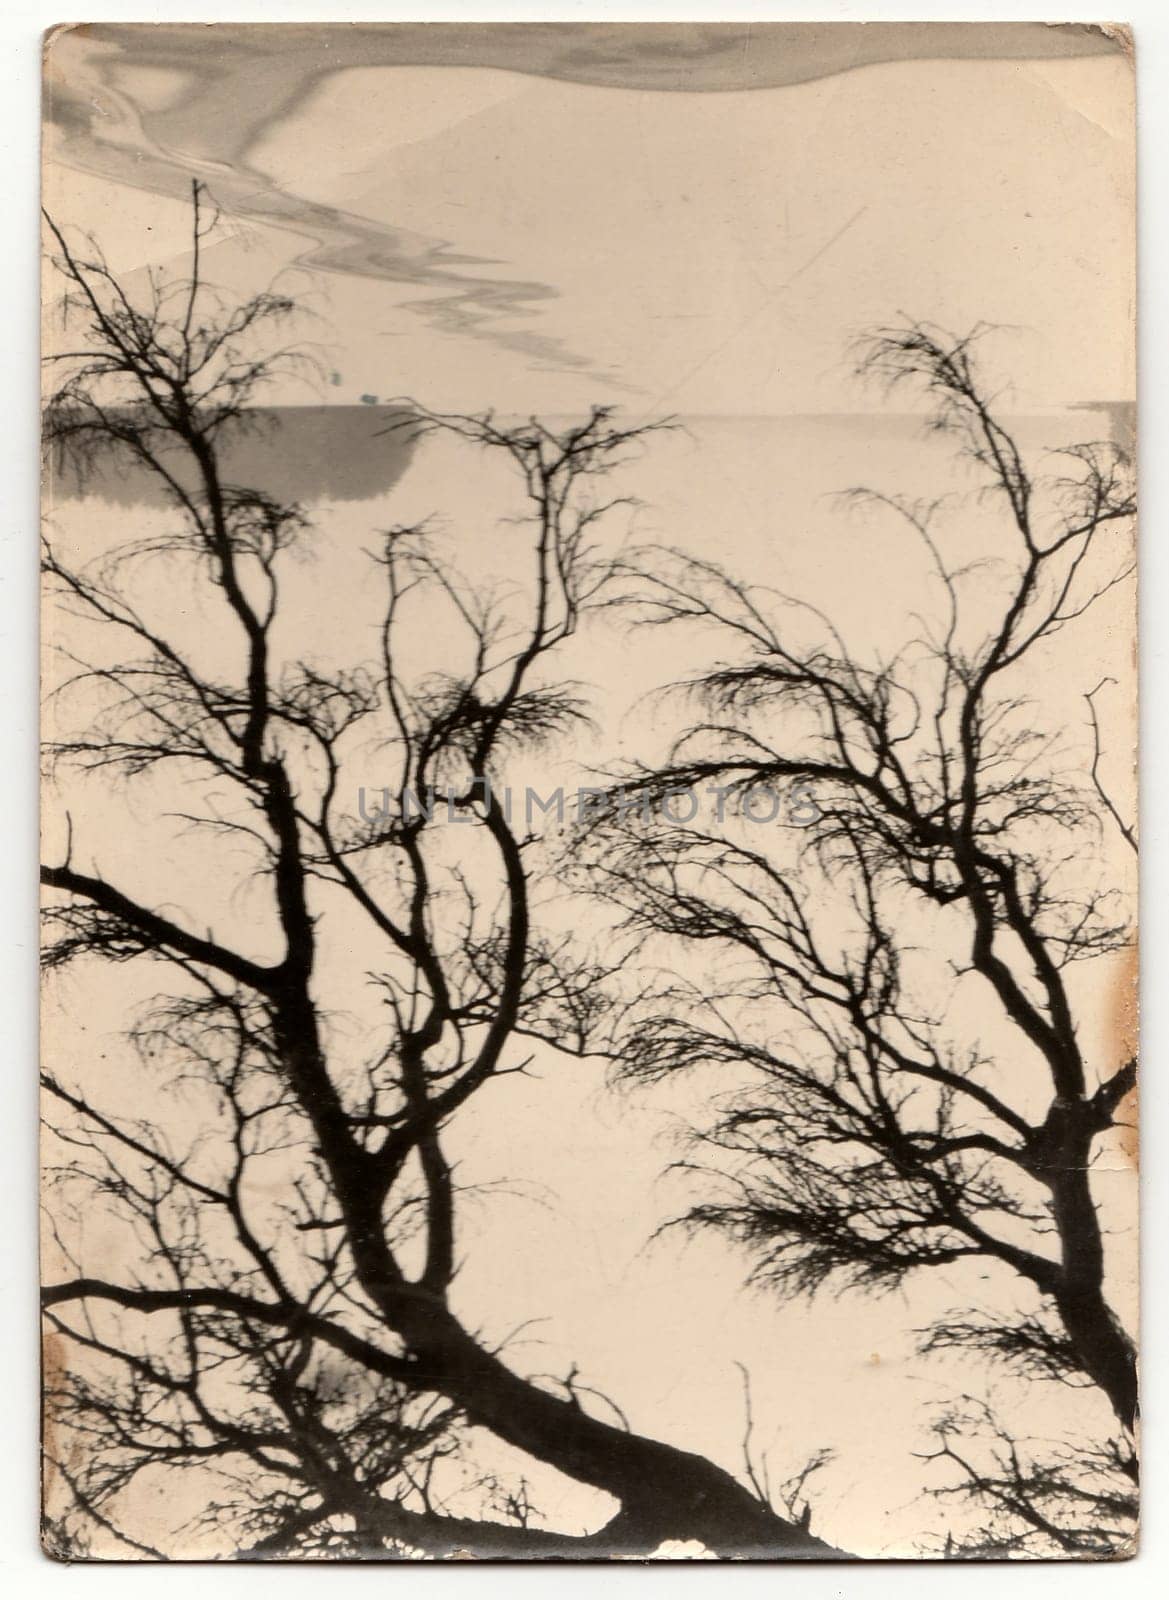 Vintage photo shows tree reflection on water surface. by roman_nerud